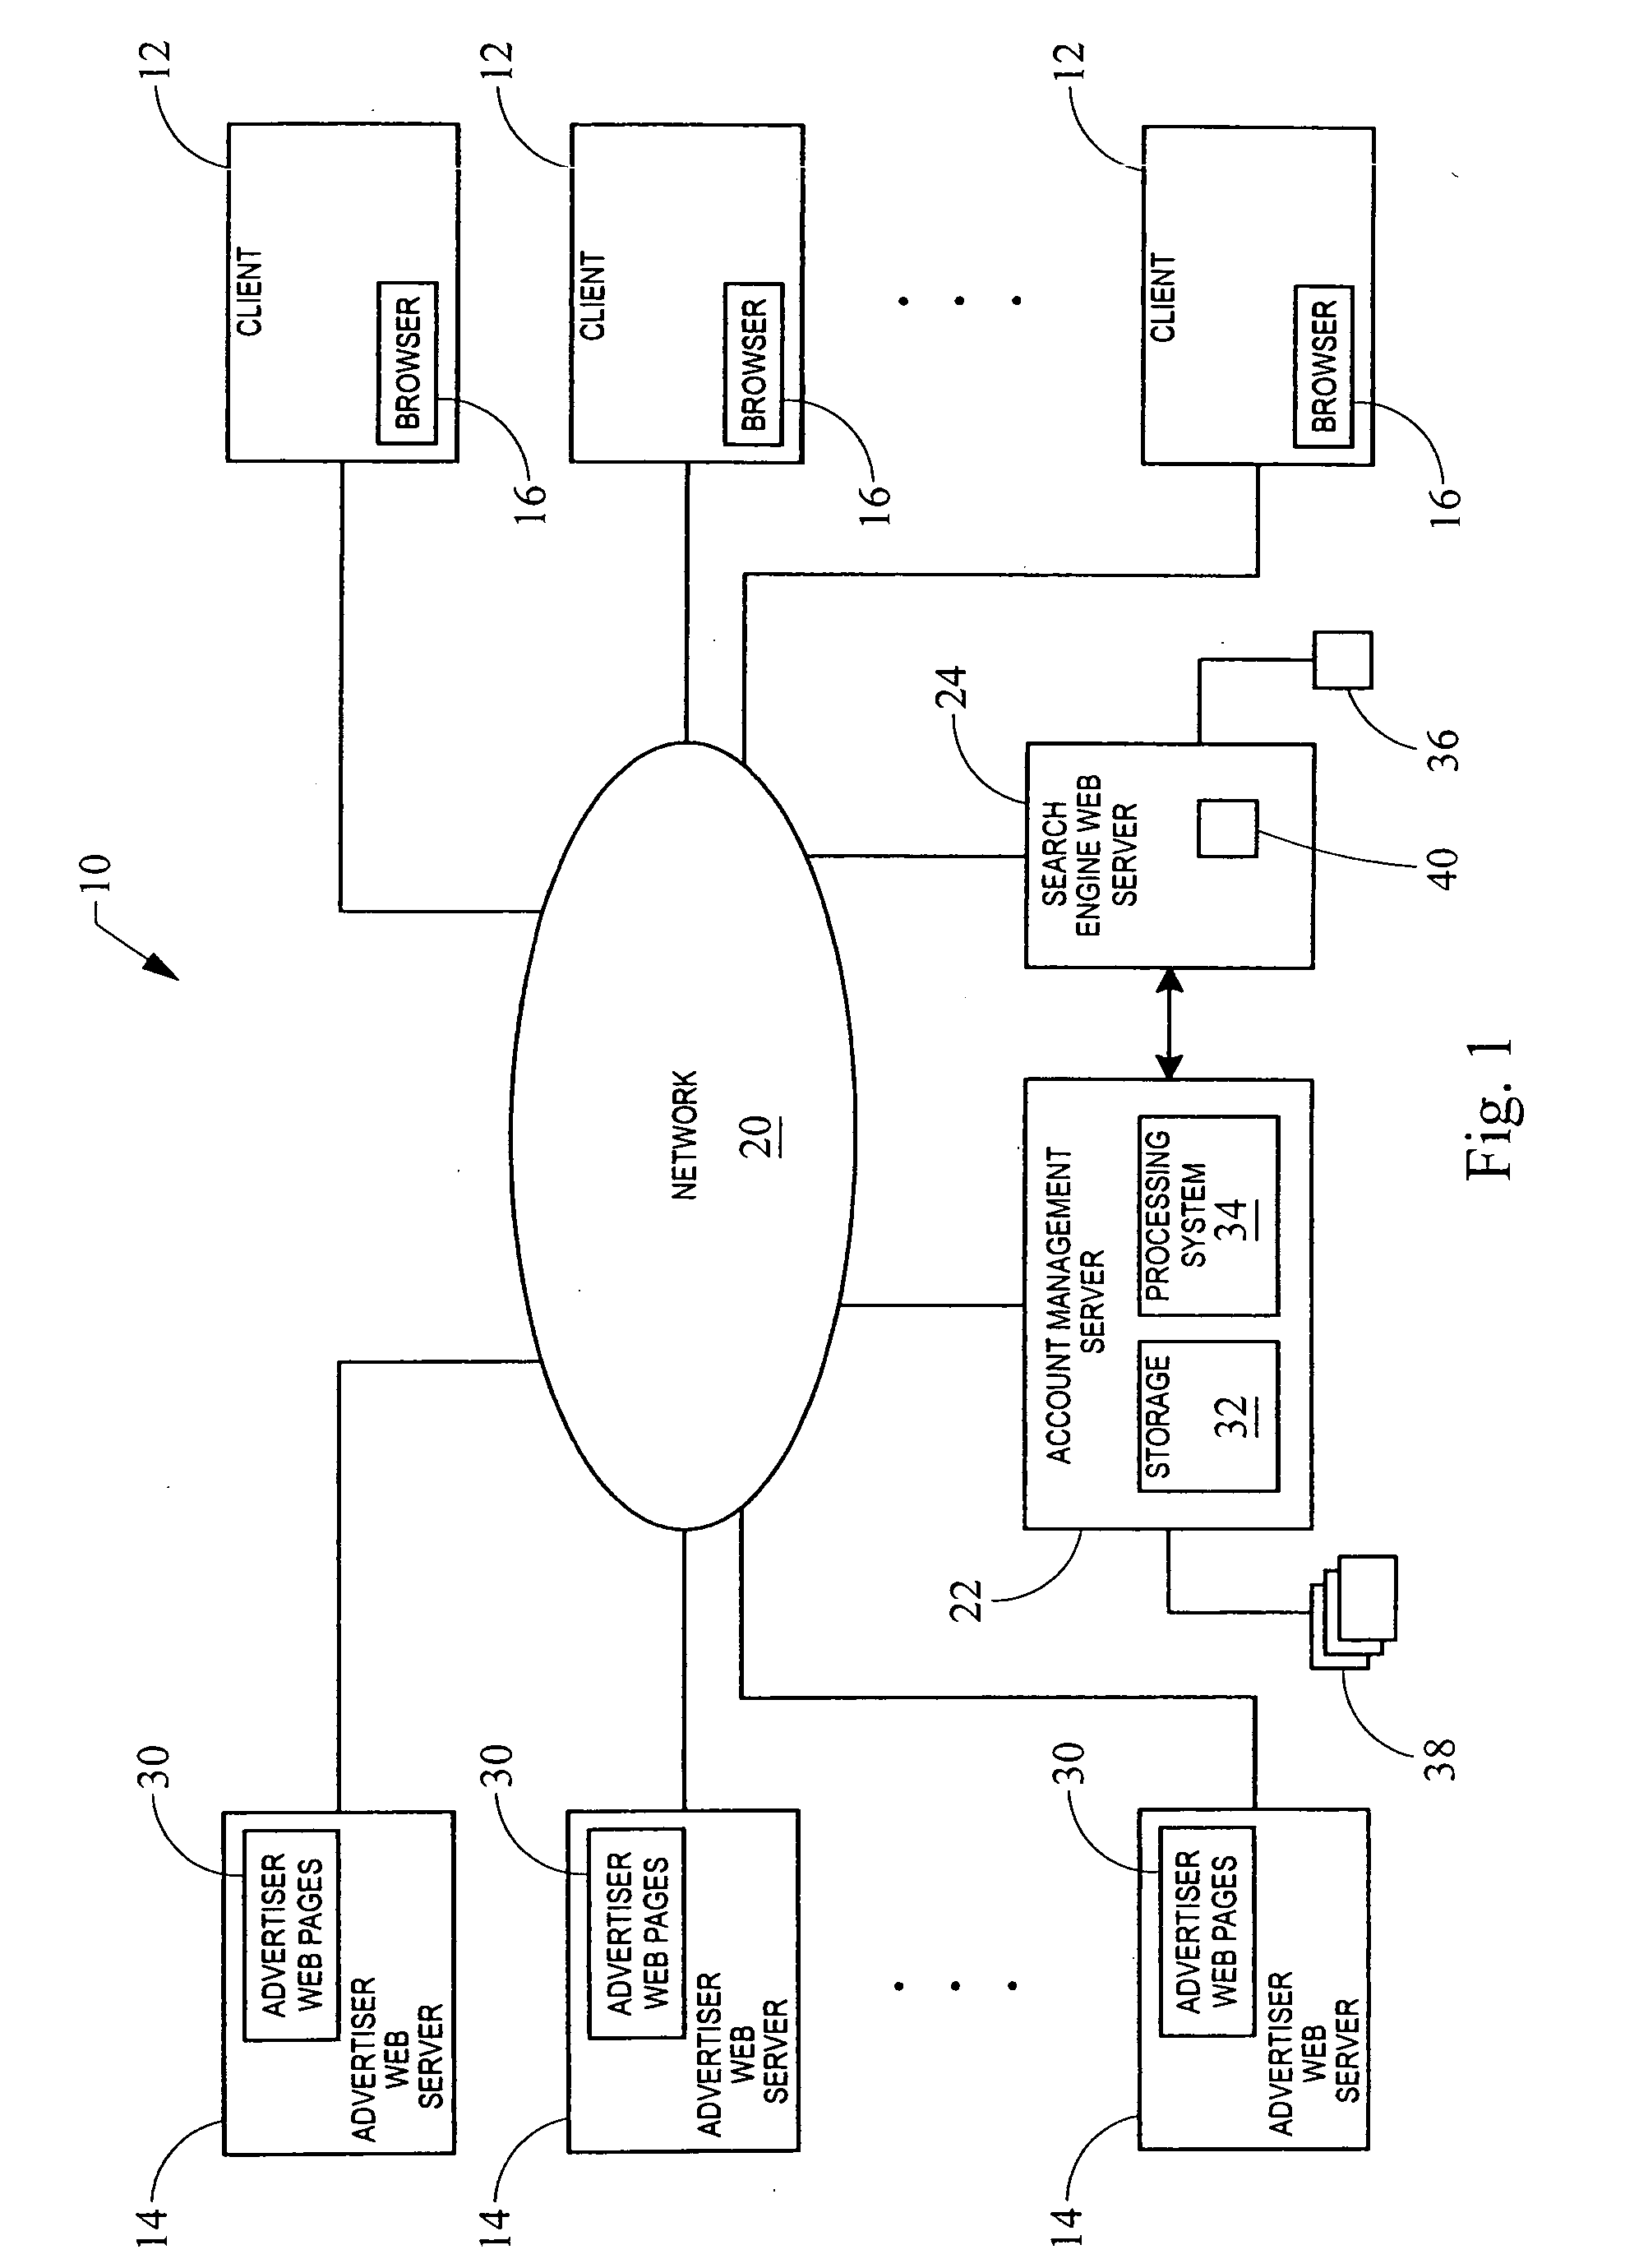 System and method for enabling multi-element bidding for influencinga position on a search result list generated by a computer network search engine